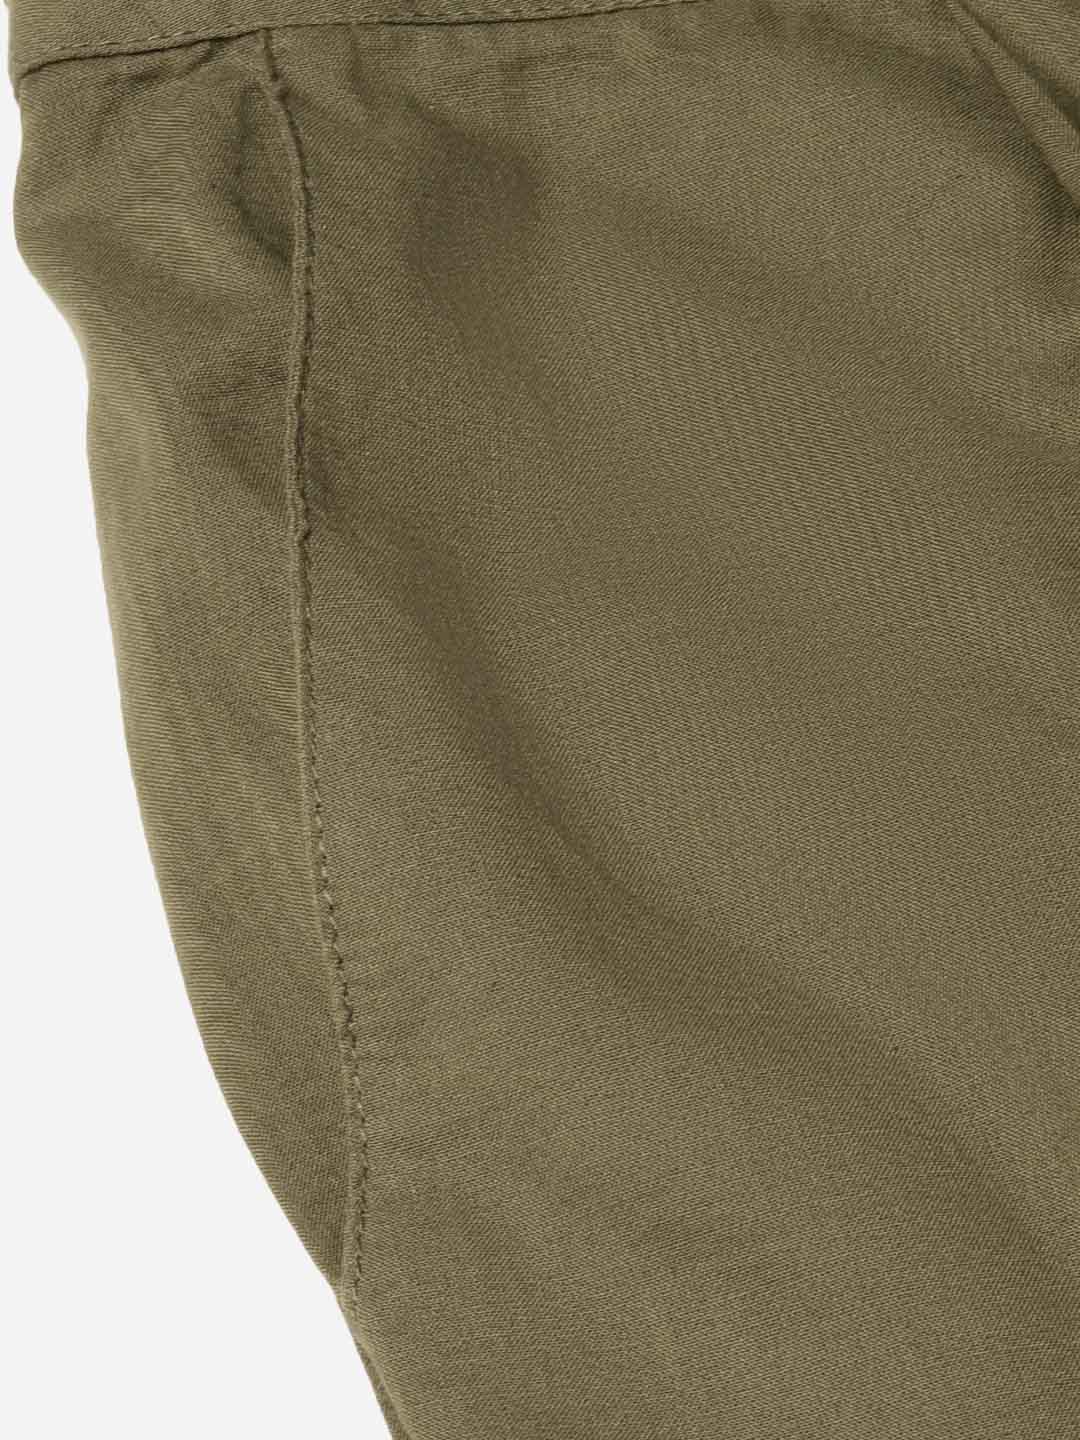 Olive Green Ethnic Wear Cotton Pants